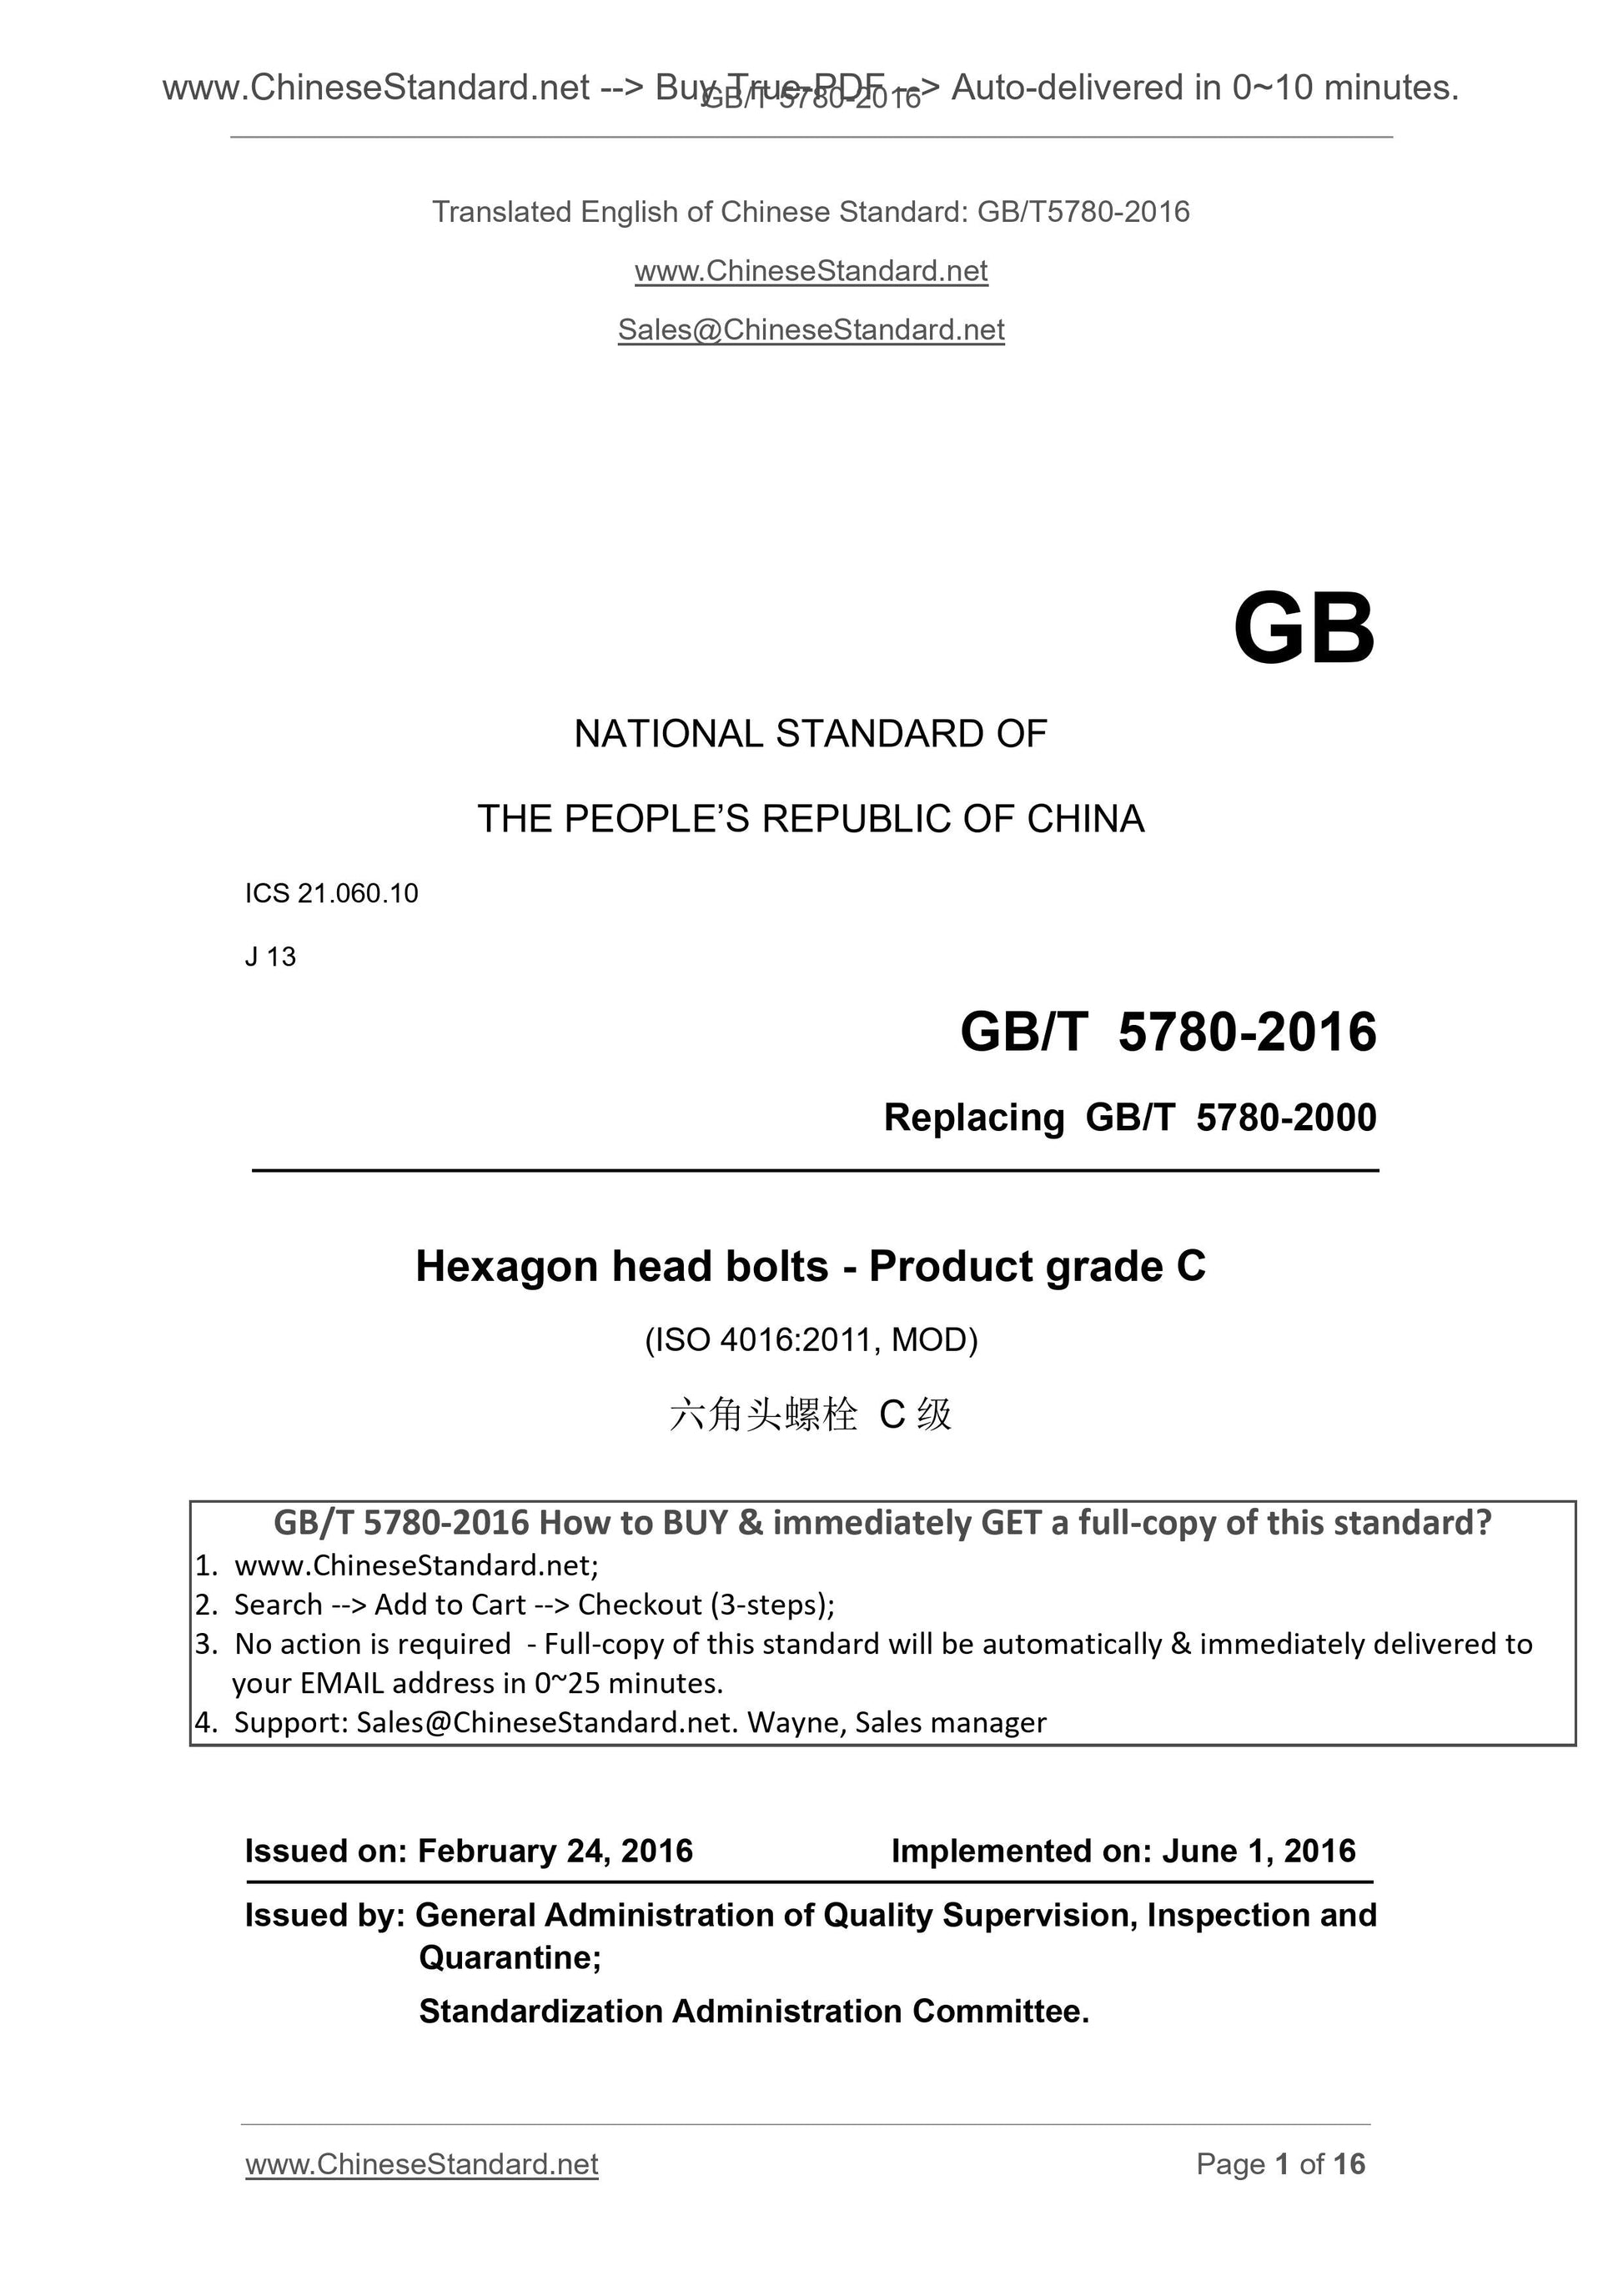 GB/T 5780-2016 Page 1